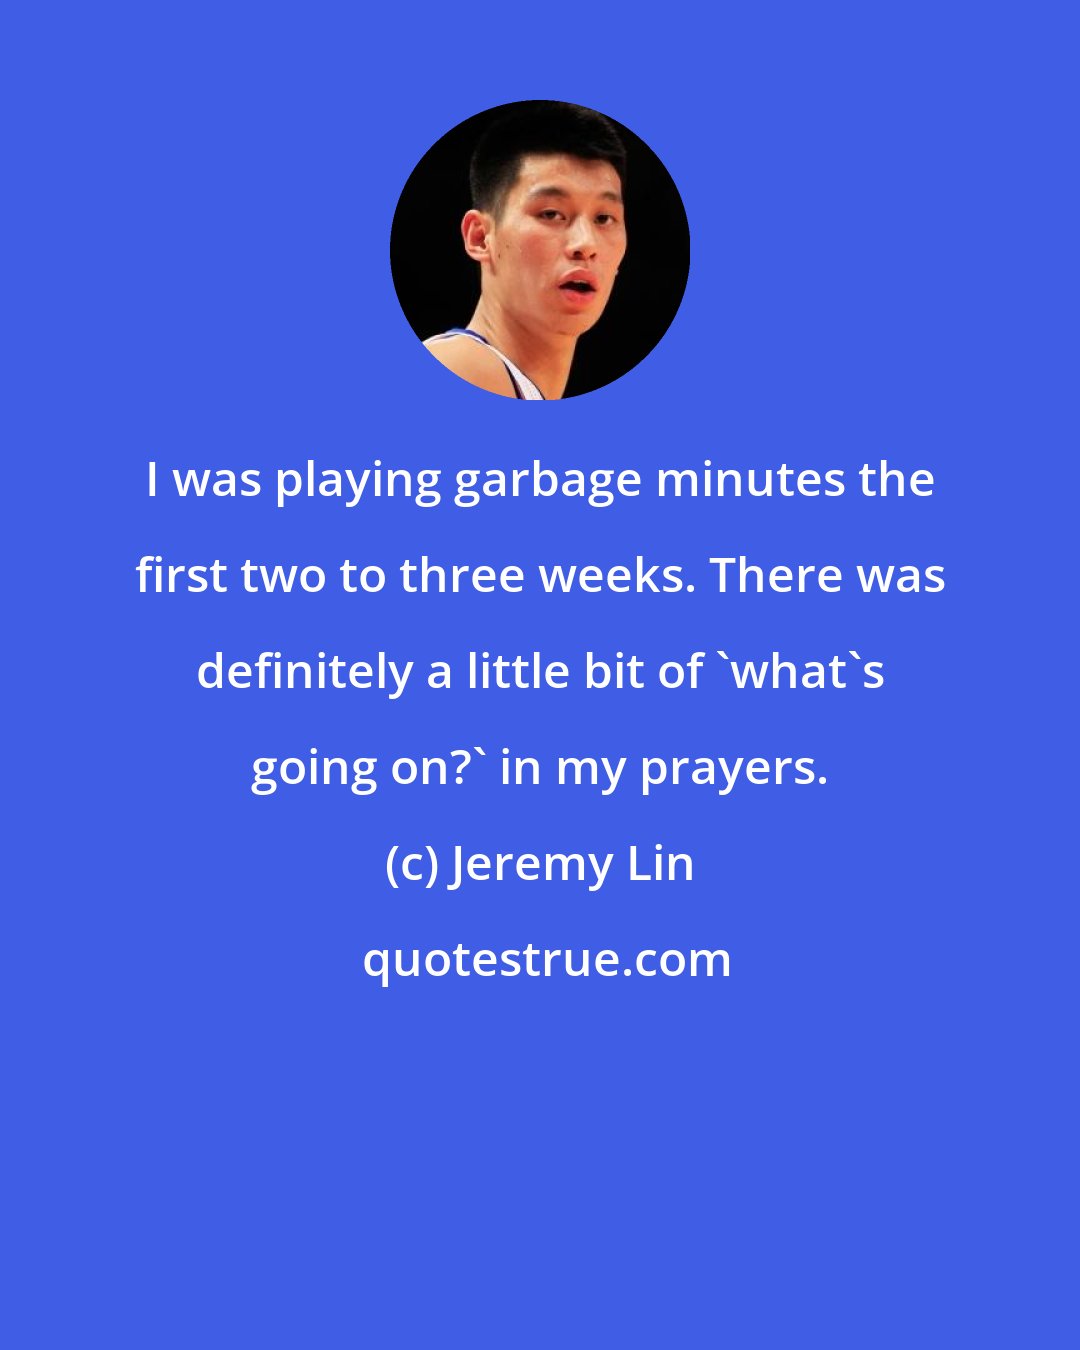 Jeremy Lin: I was playing garbage minutes the first two to three weeks. There was definitely a little bit of 'what's going on?' in my prayers.